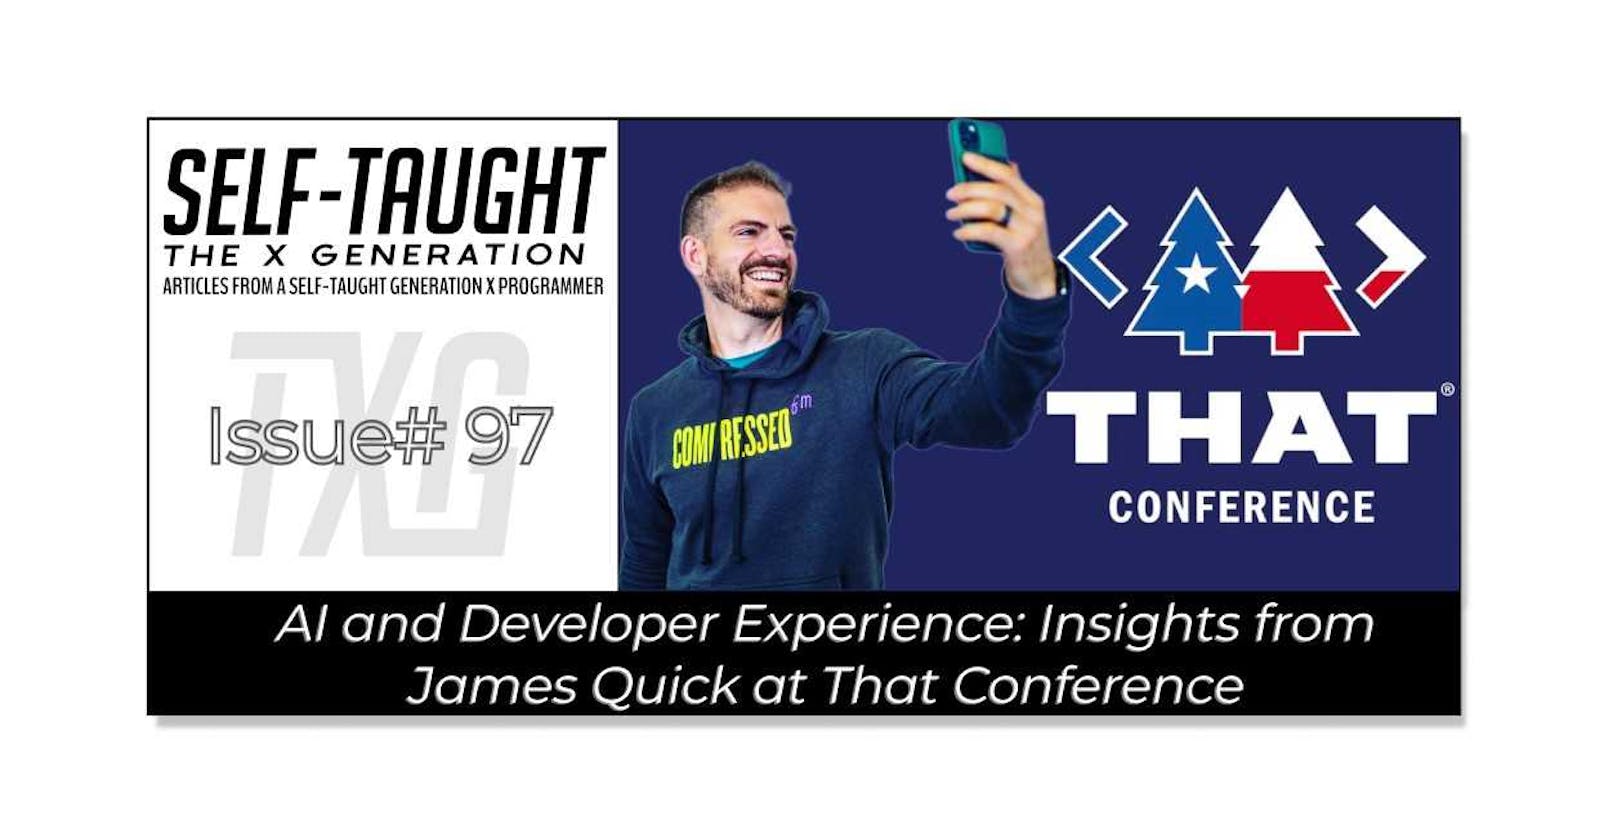 AI and Developer Experience: Insights from James Quick at That Conference